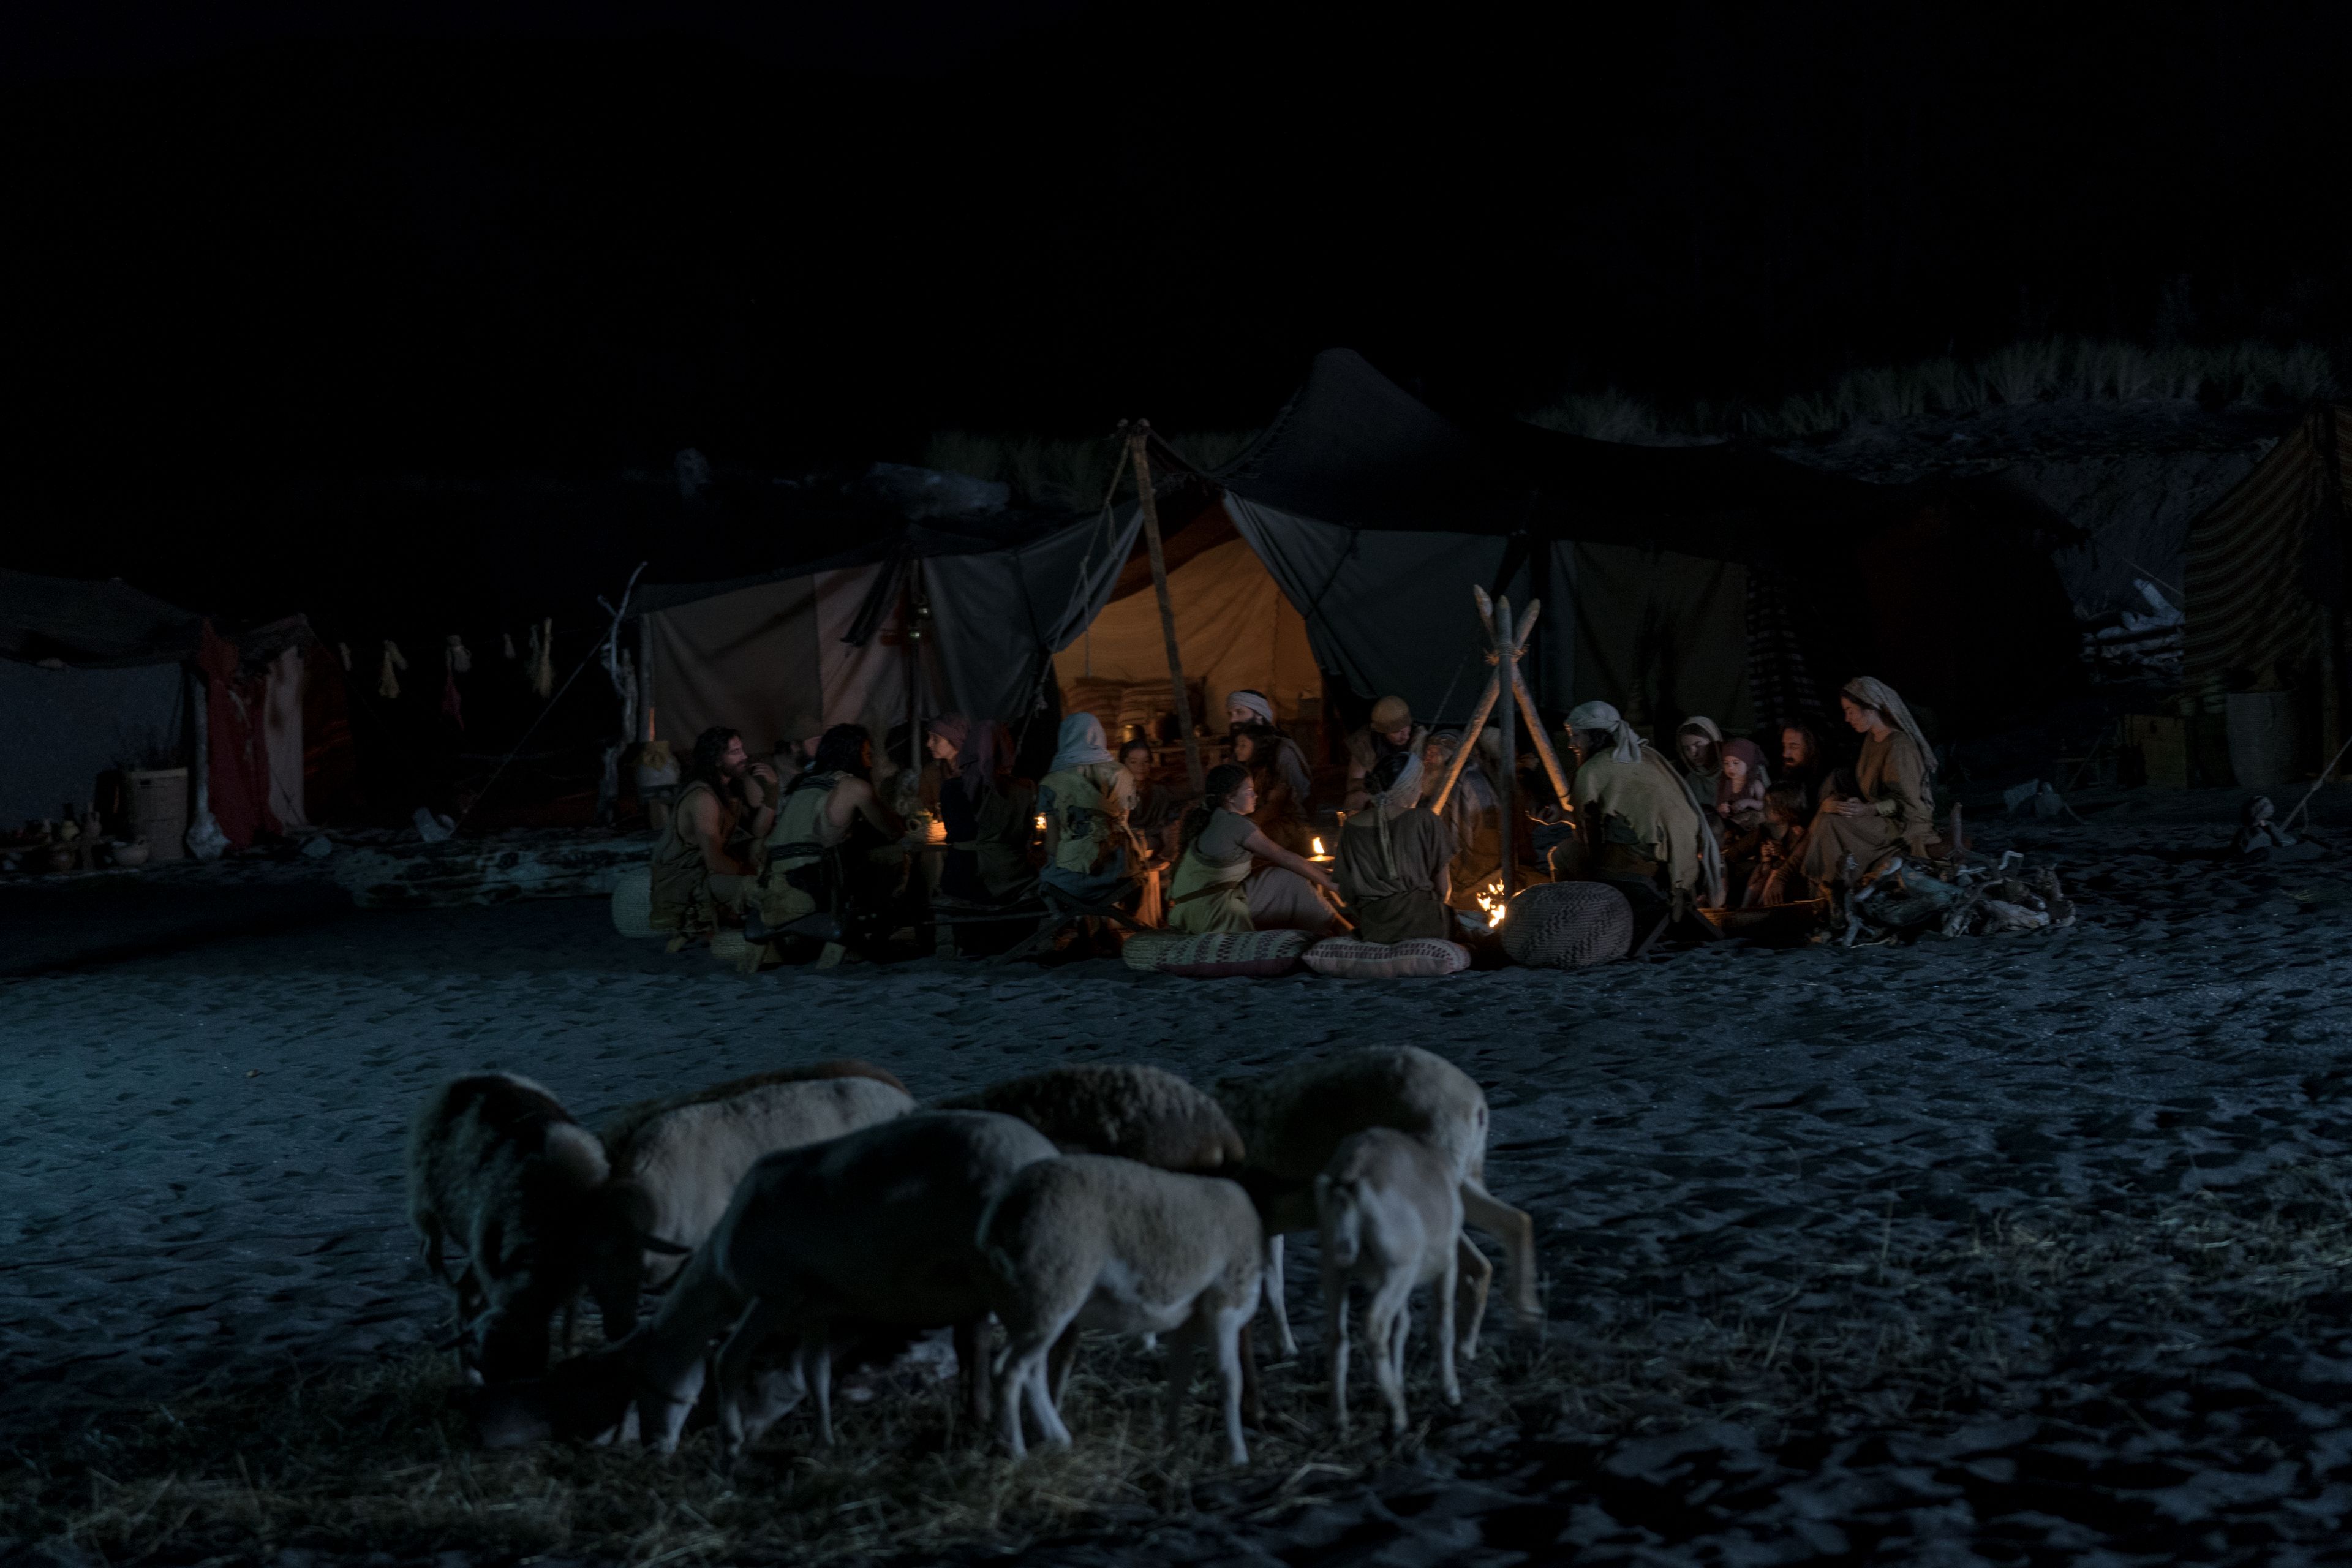 Lehi's family gathers around a campfire in the land of Bountiful.